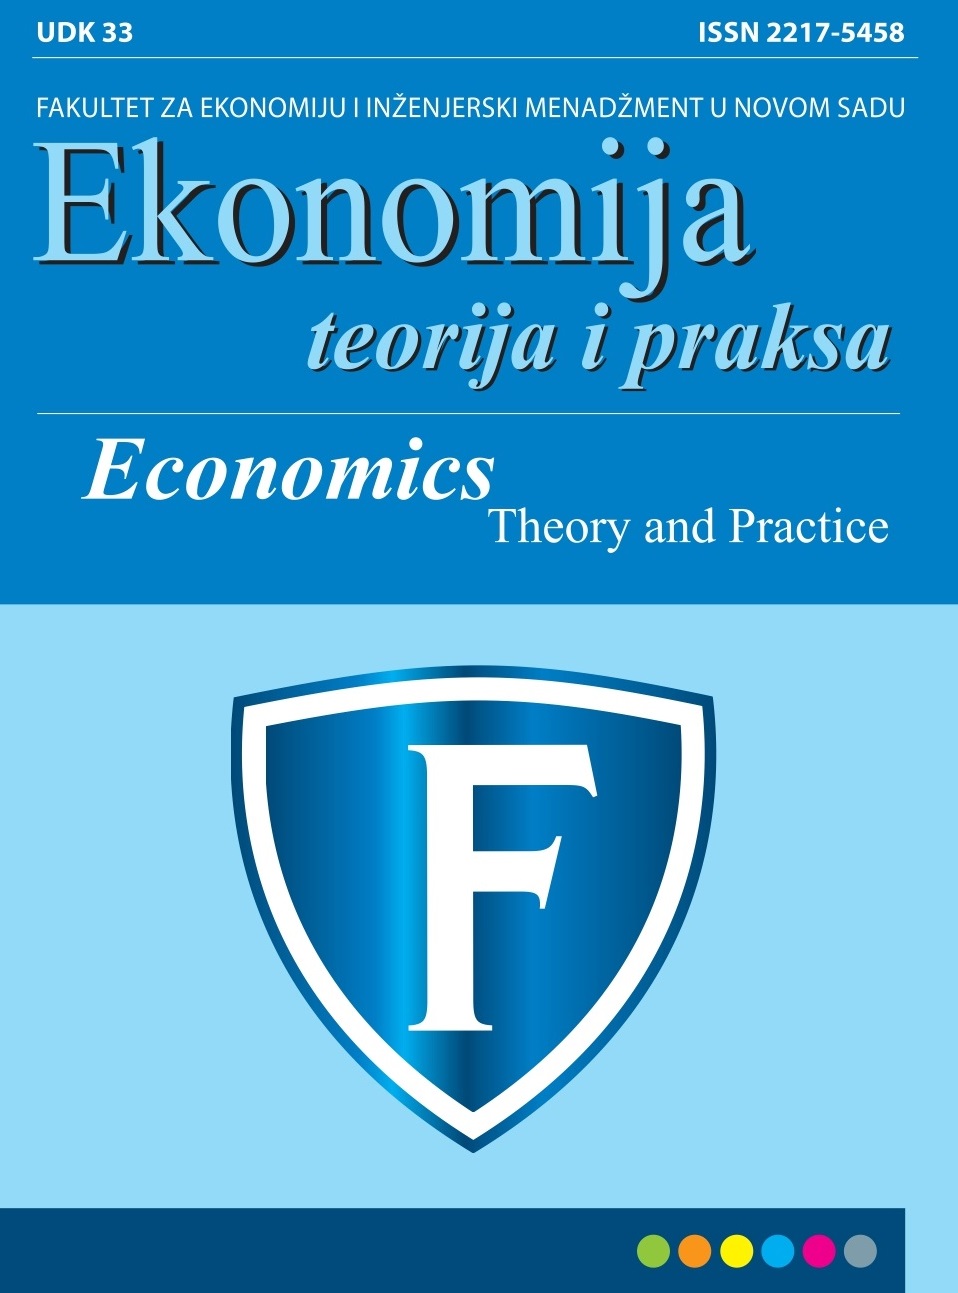 					View Vol. 12 No. 4 (2019): Economics - Theory and Practice
				